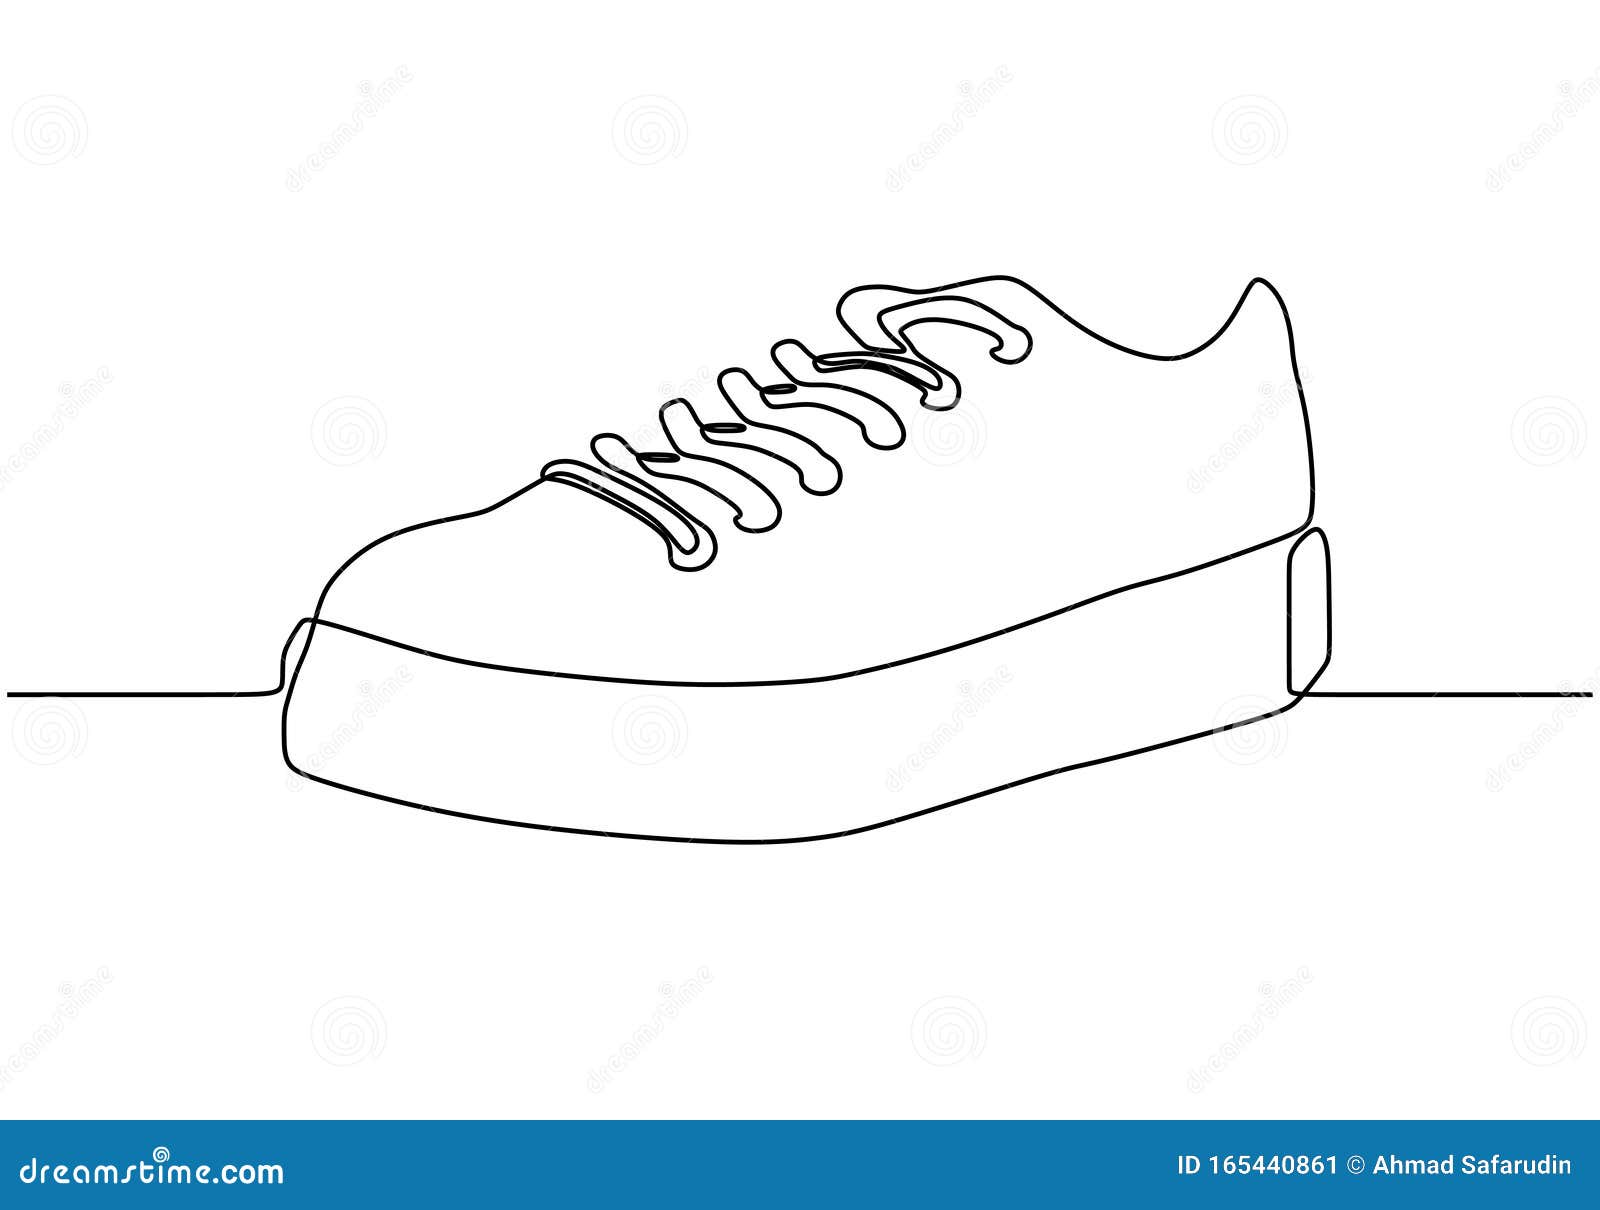 Continuous One Line Drawing of Sneakers Shoe Stock Vector ...